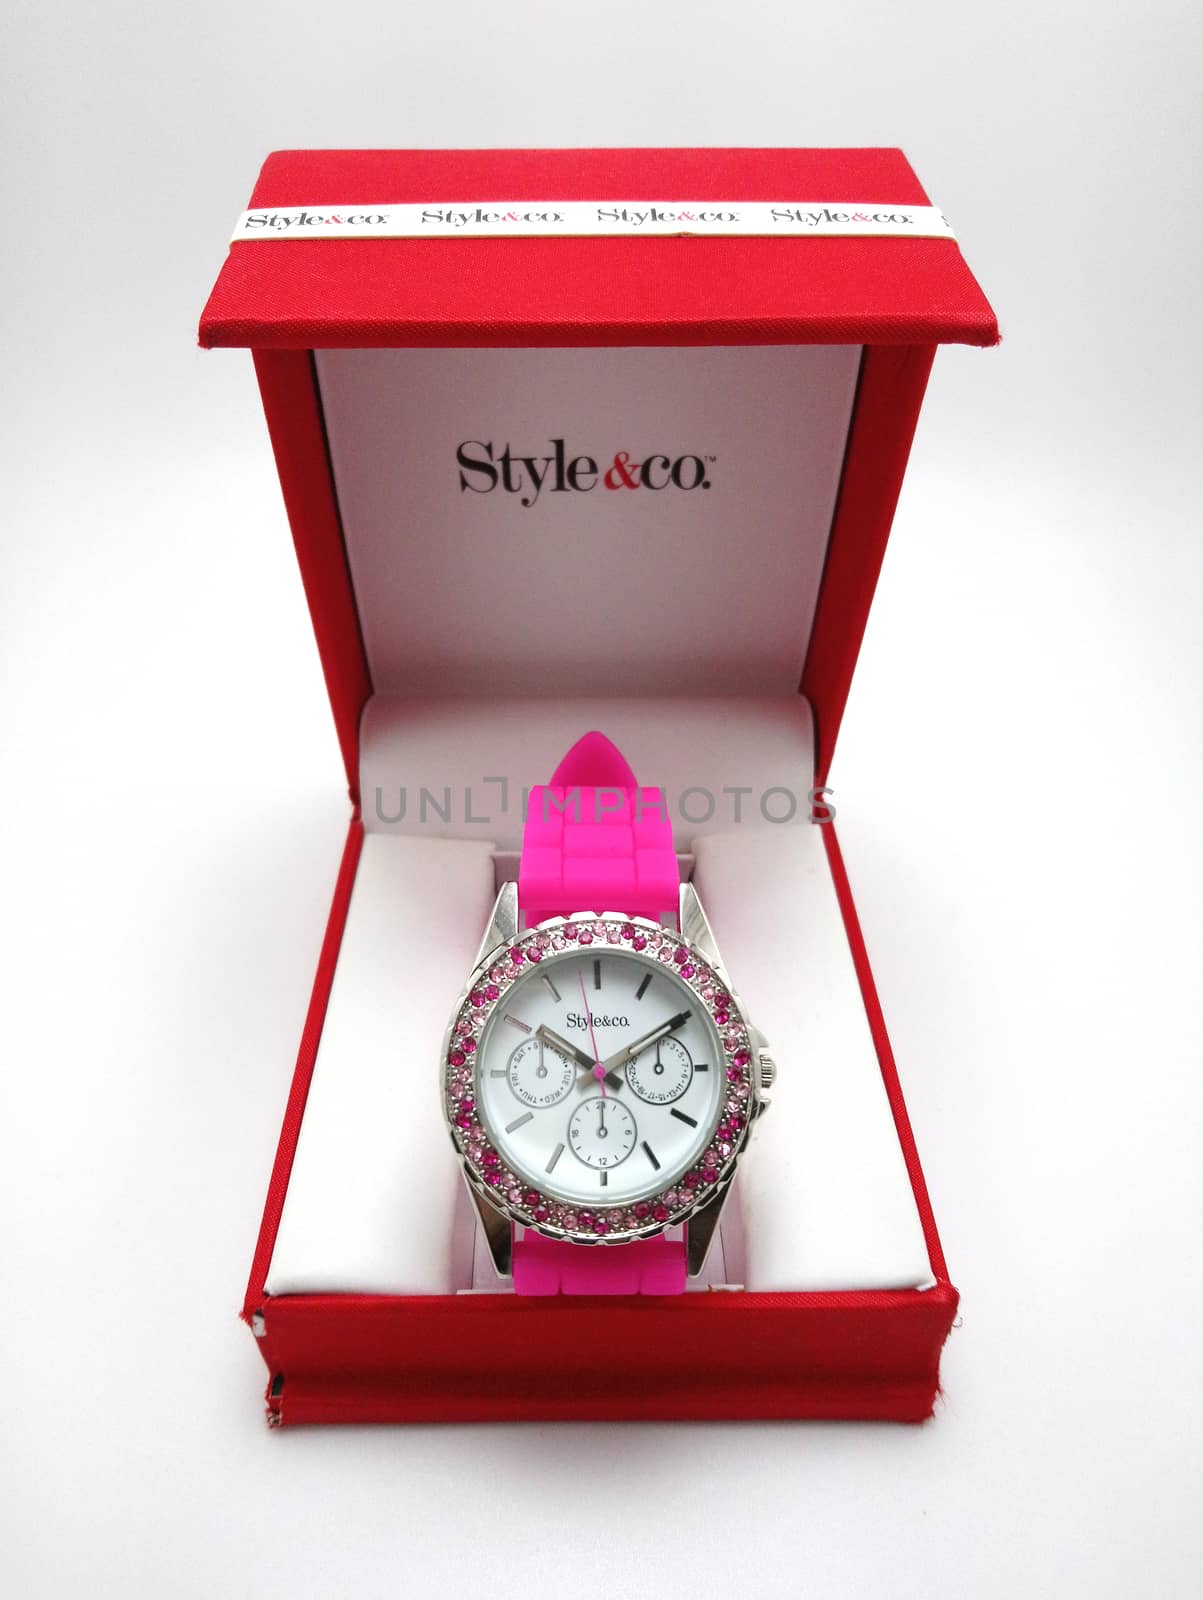 Style and co ladies wrist watch at red box in Manila, Philippine by imwaltersy